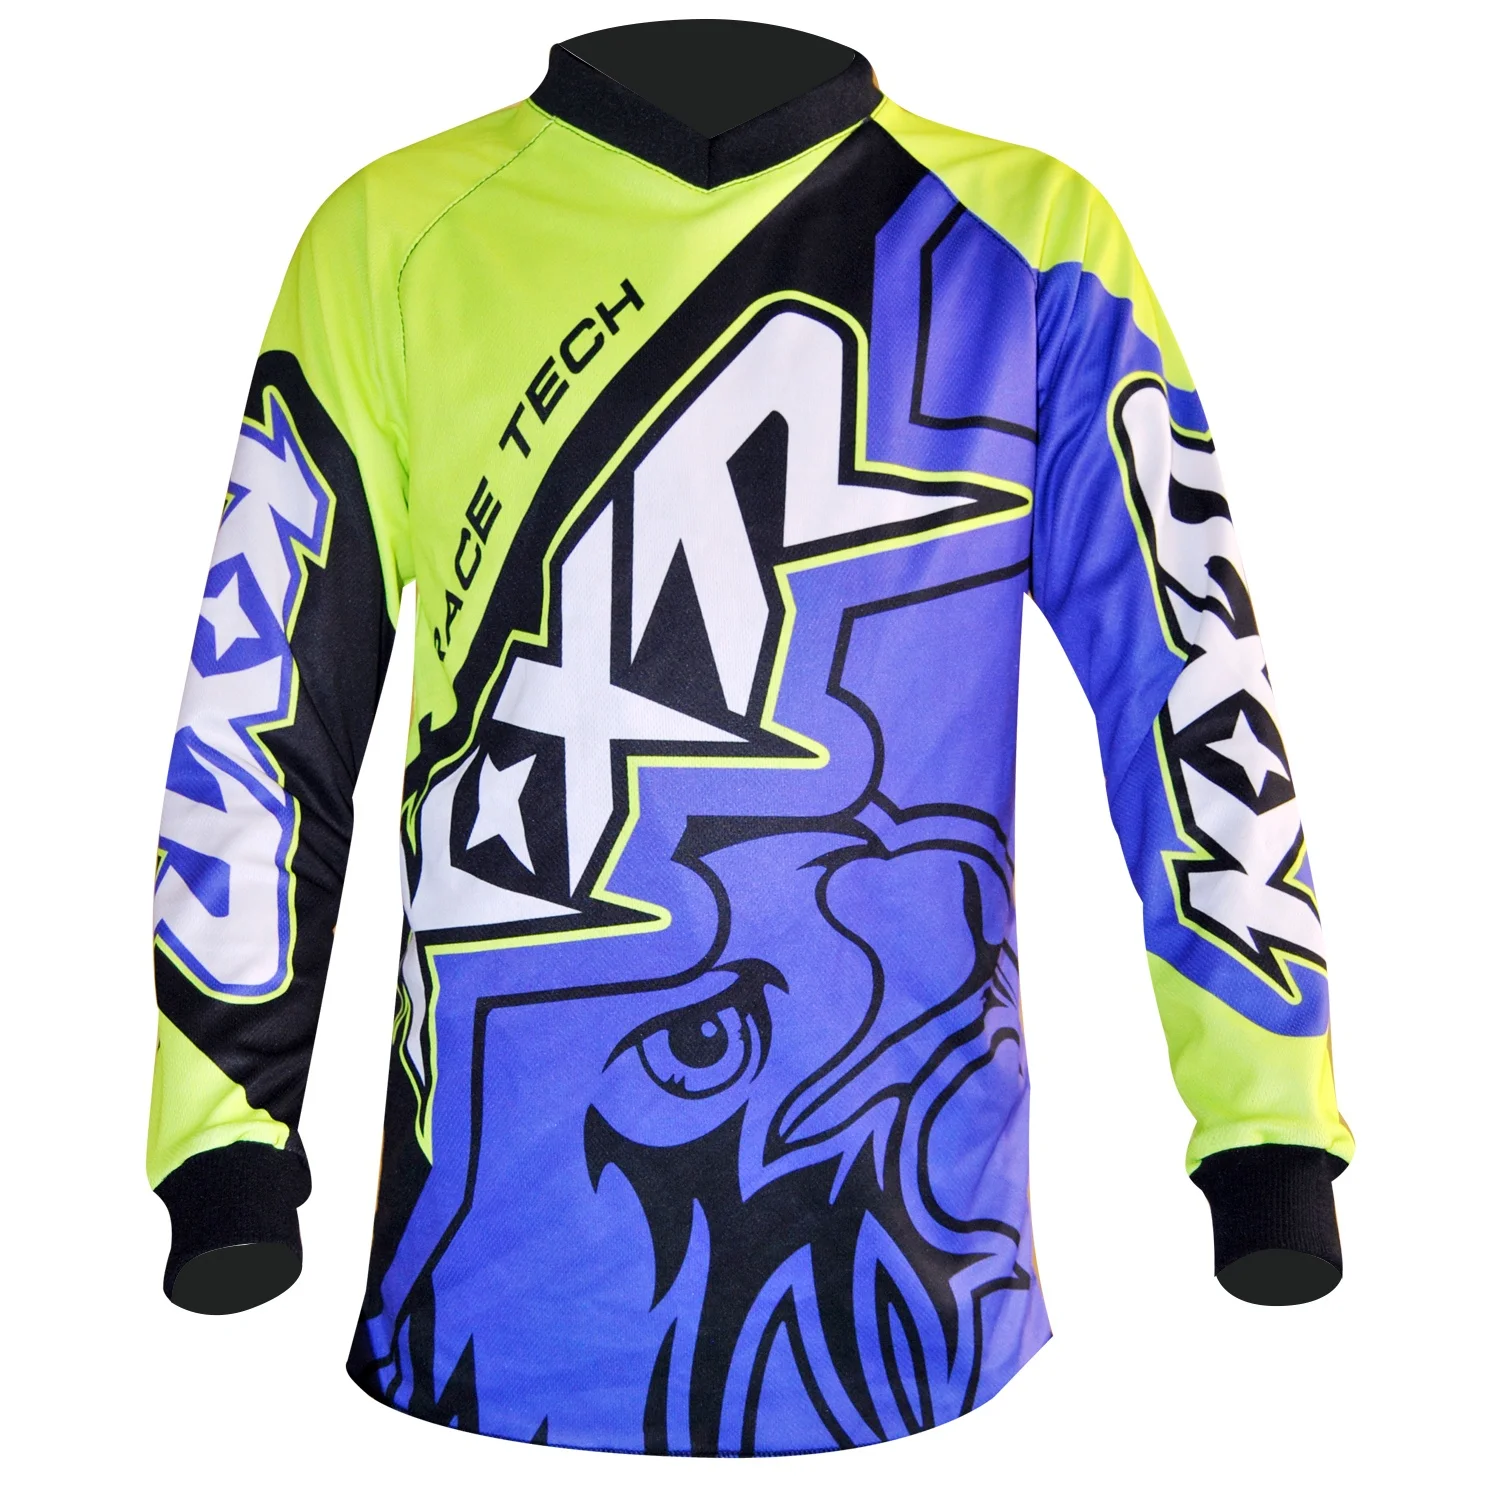 mx jersey and pants